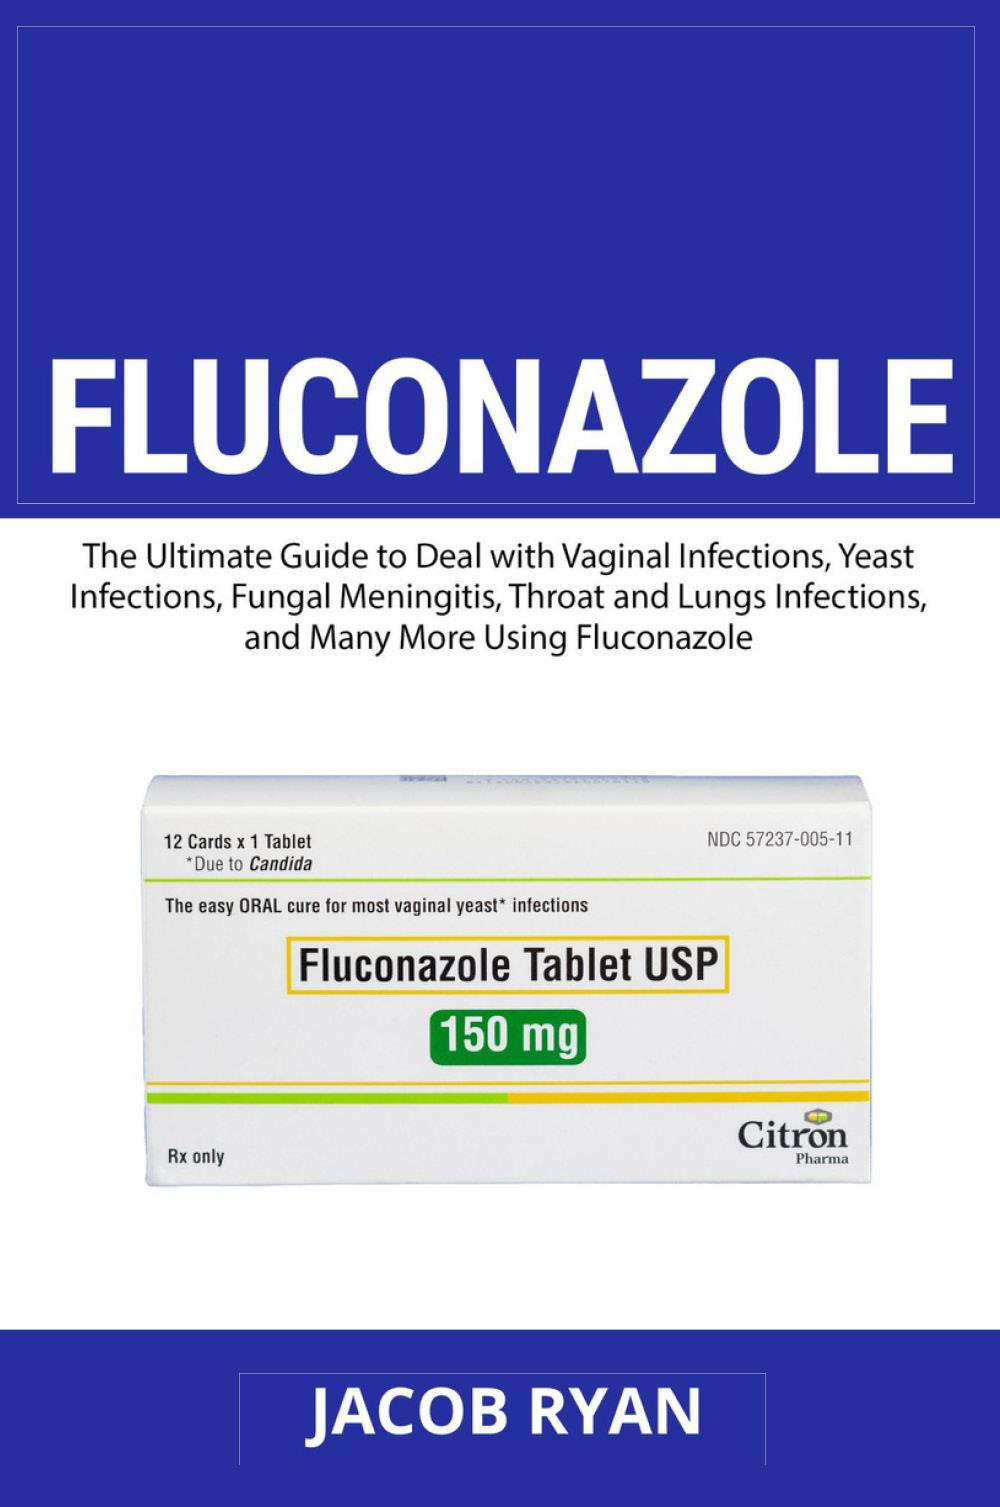 Fluconazole. The ultimate guide to deal with vaginal infections, yeast infections, fungal meningitis, throat and lungs infections, and many more using fluconazole